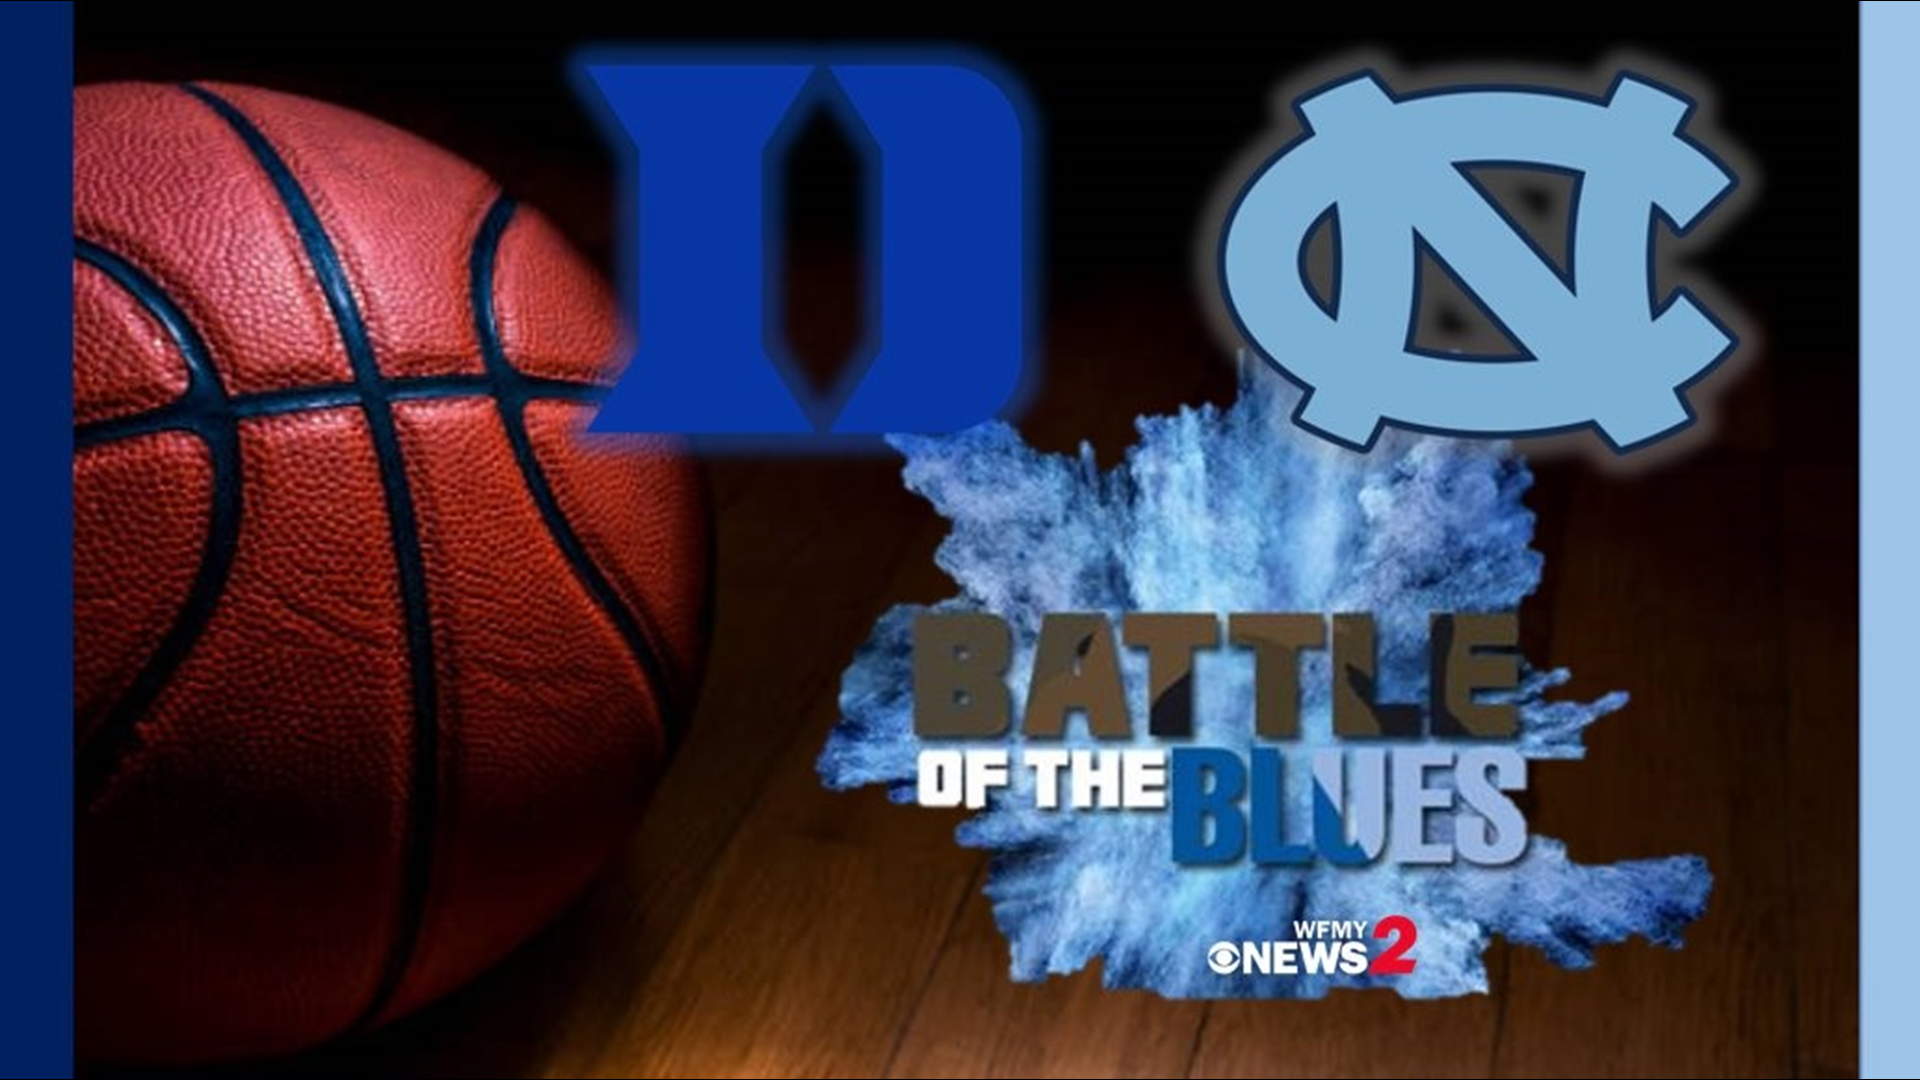 The WFMY staff give their game predictions for tonight's Duke vs UNC game!